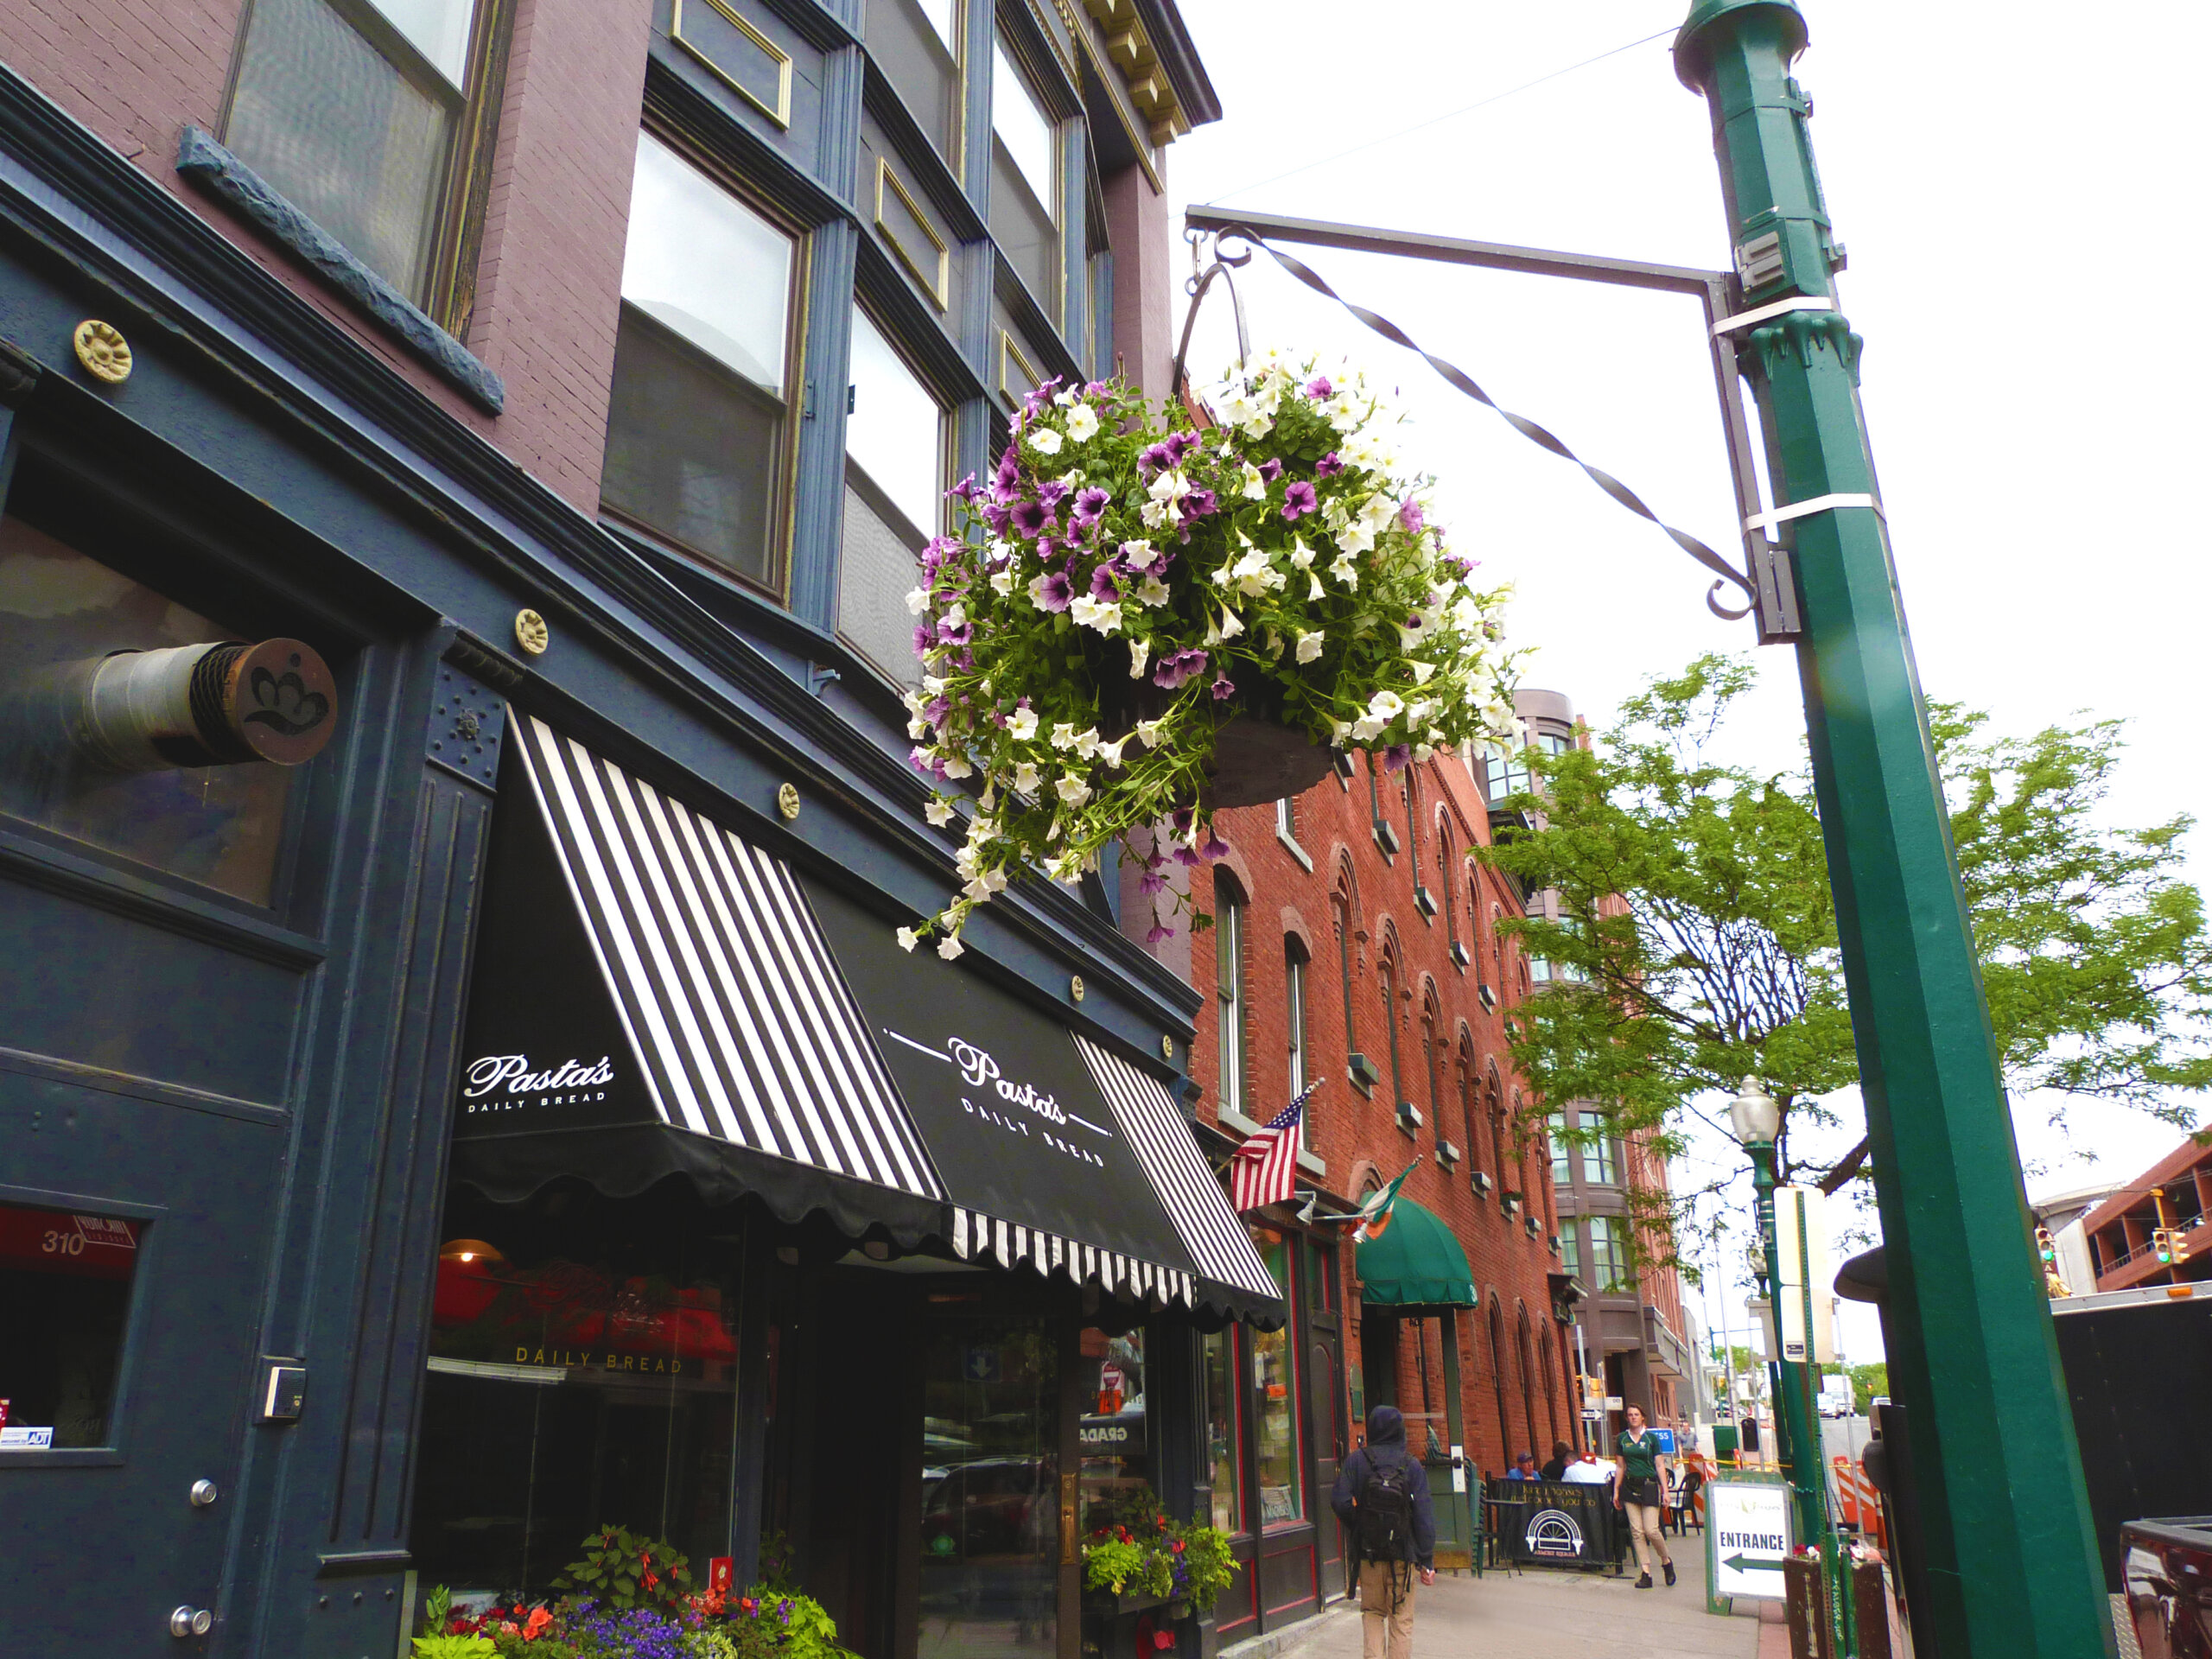 Hanging basket of flowers outside Pasta's Daily Bread in downtown Syracuse